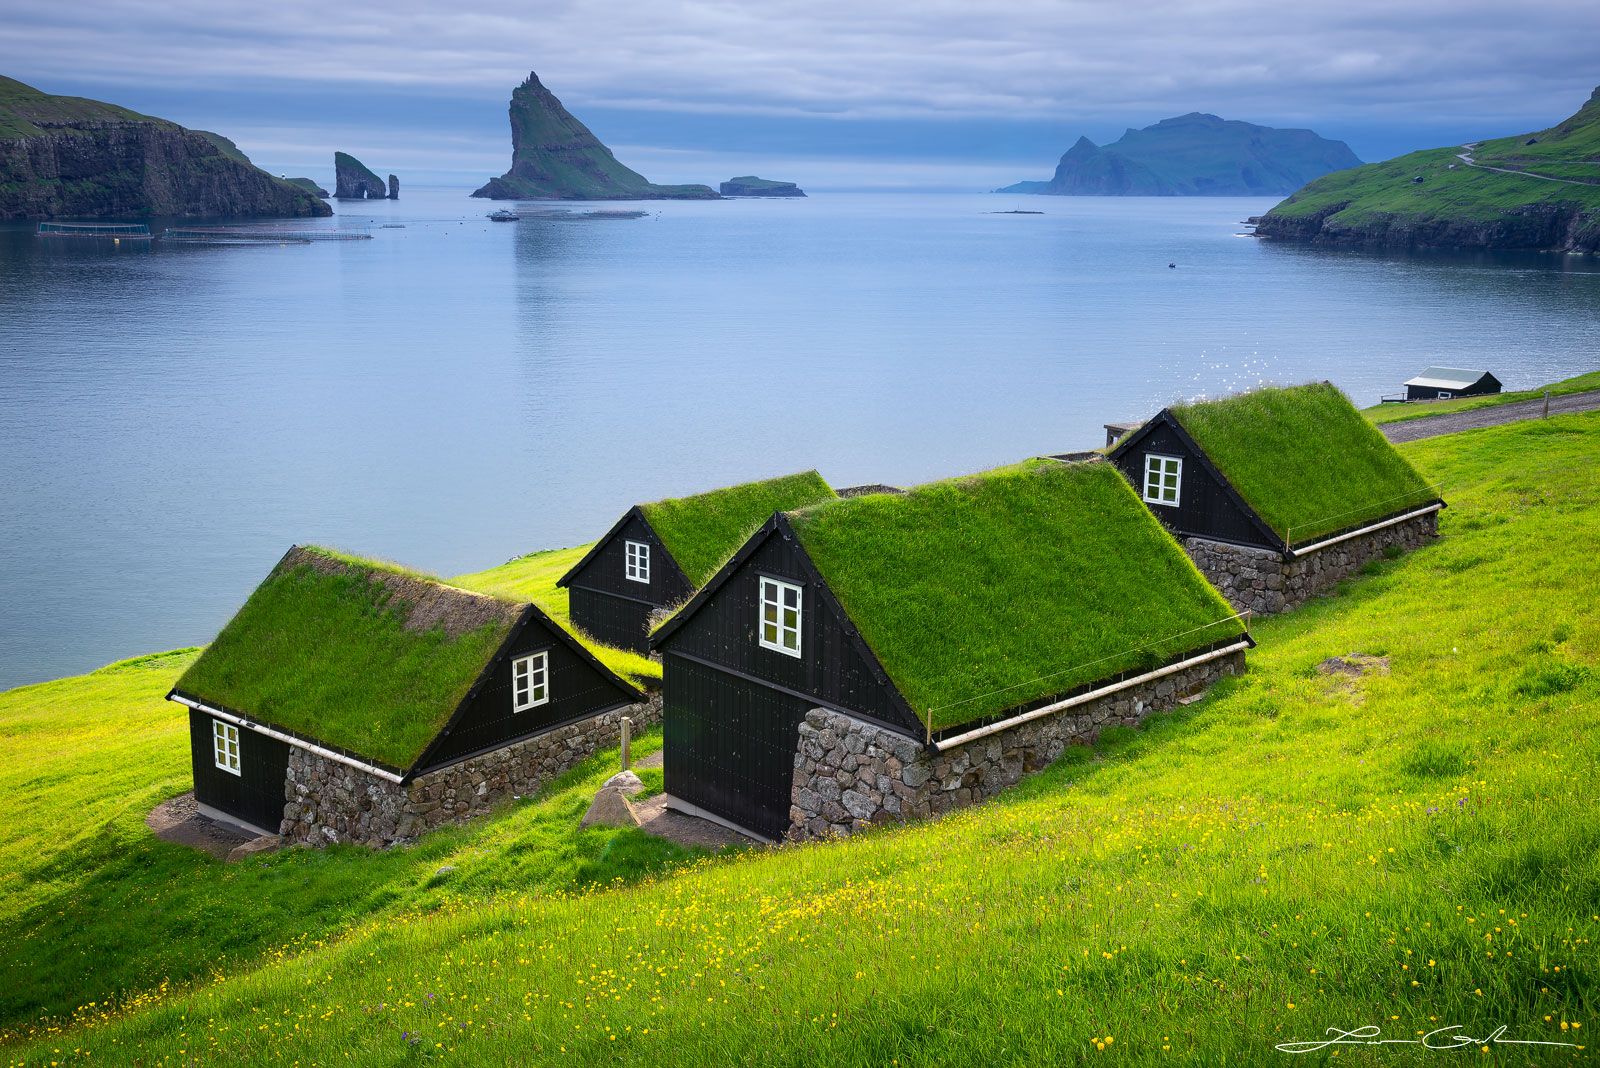 Beautiful green roof cottages by the ocean shore - Faroe Islands - Gintchin Fine Art